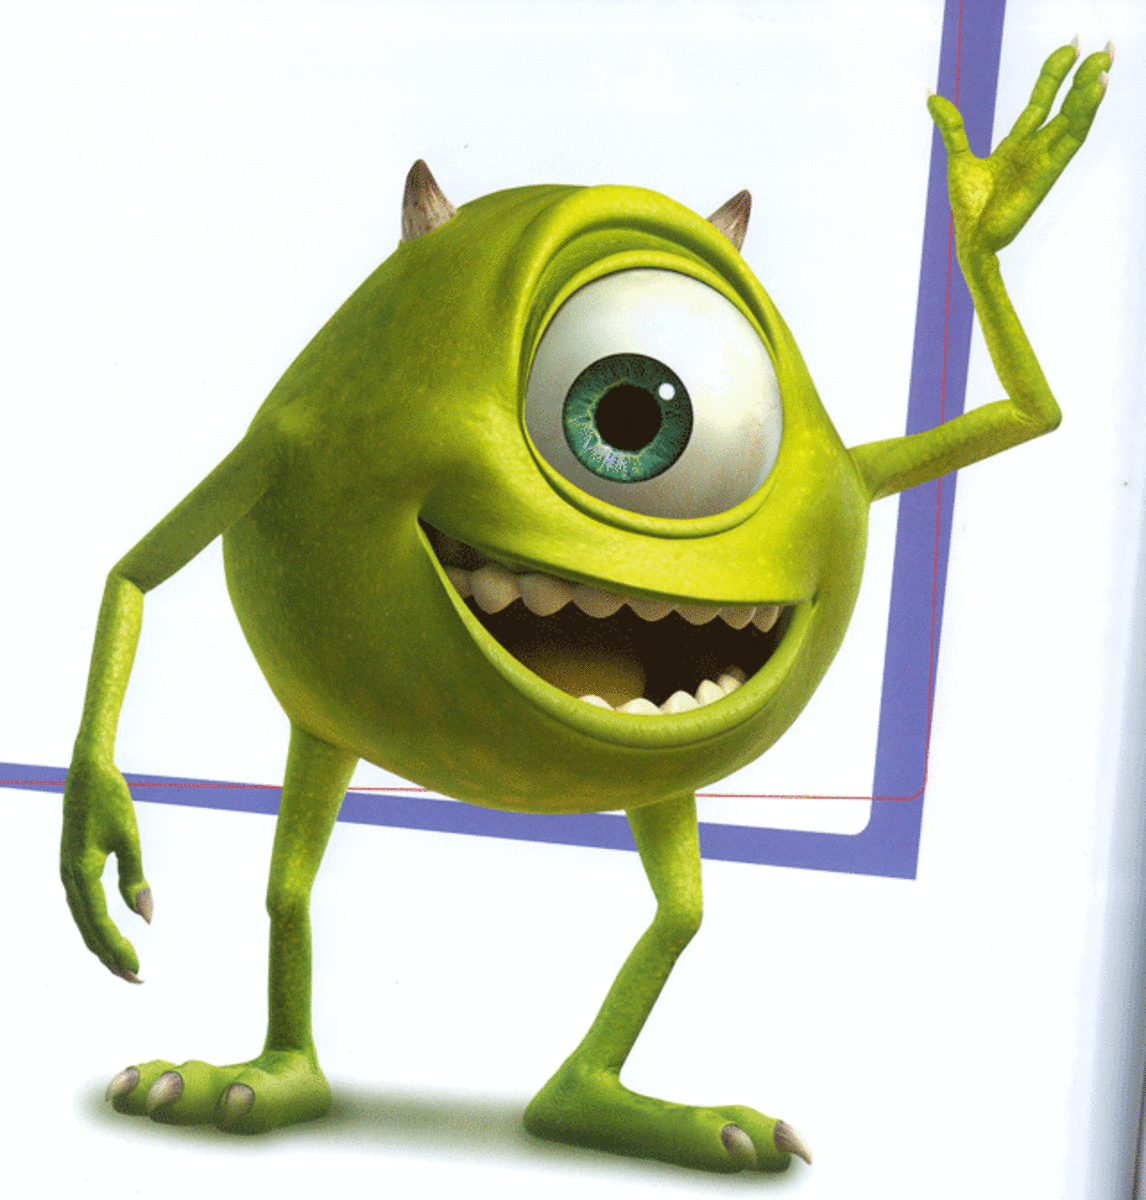 Mike Wazowski took his girlfriend Celia to eat sushi in 2001's "Monsters, Inc."